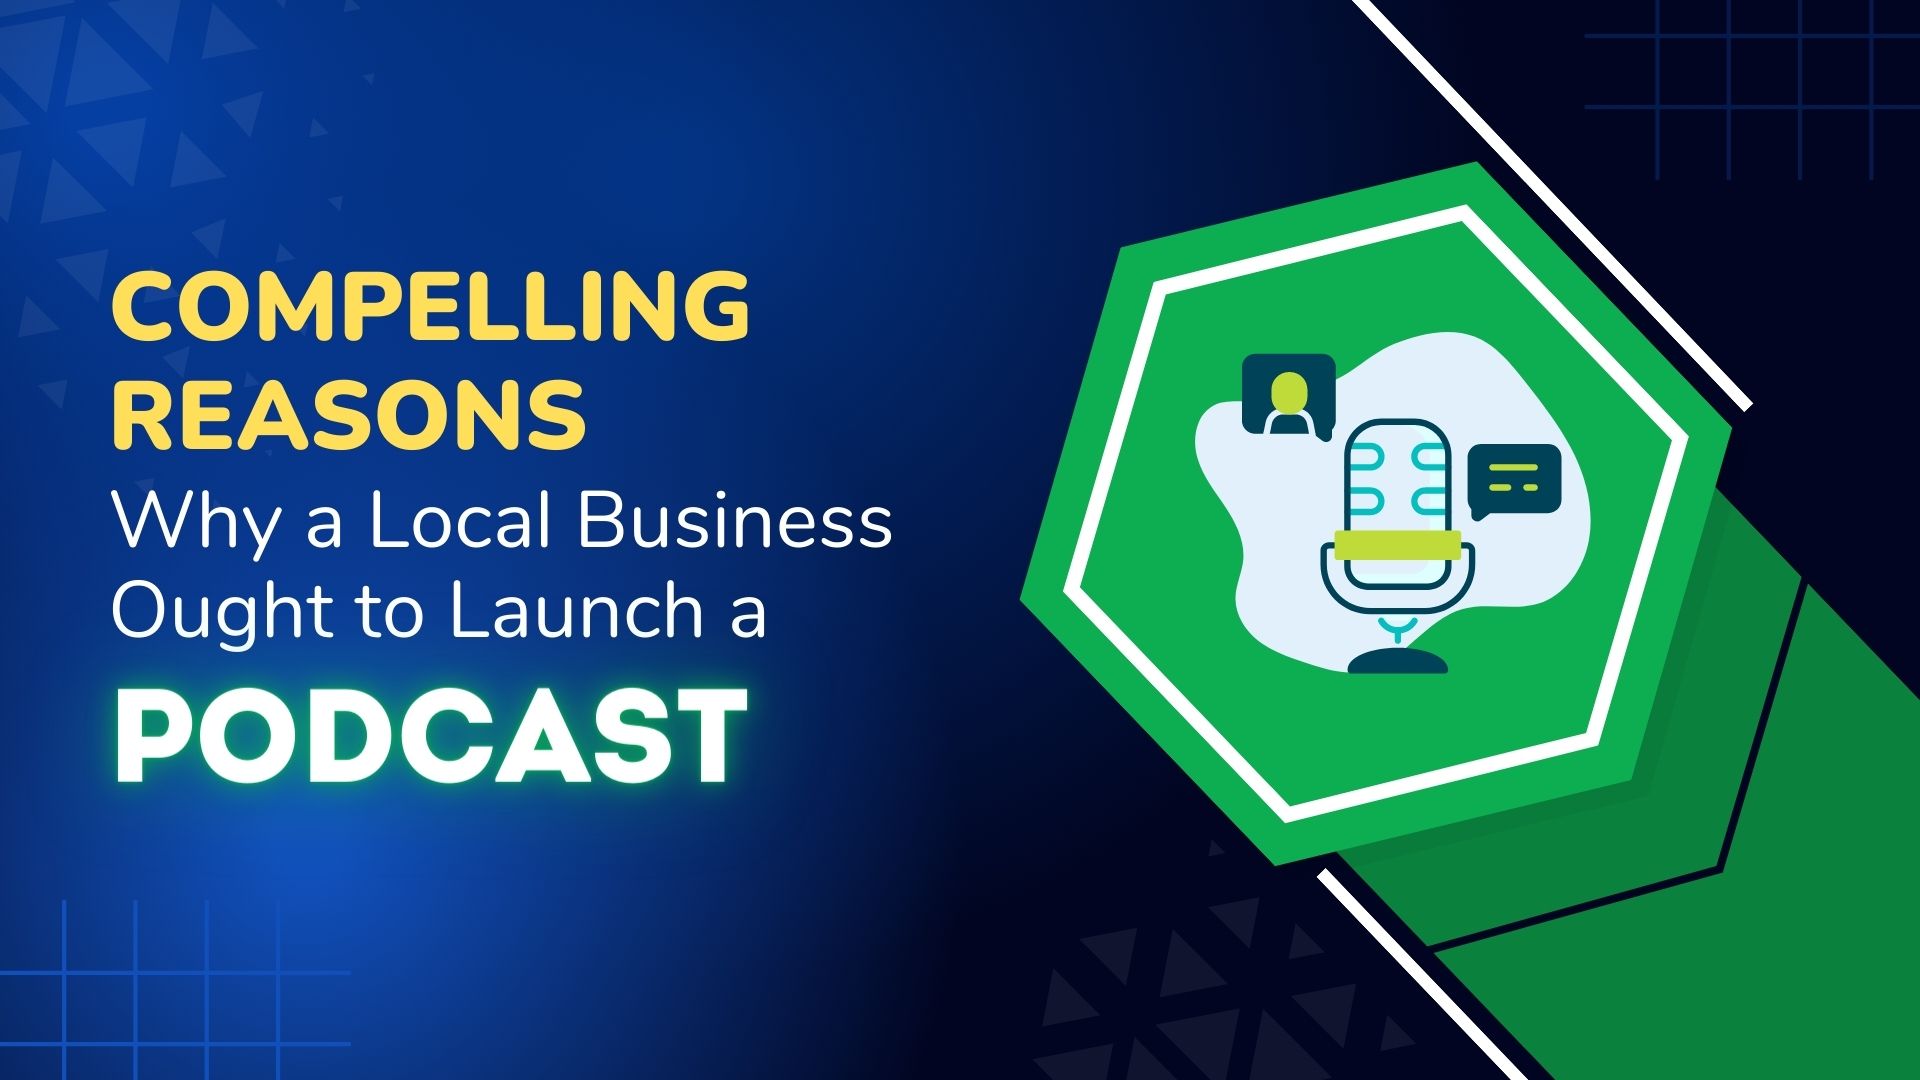 Compelling Reasons Why a Local Business Should Launch a Podcast